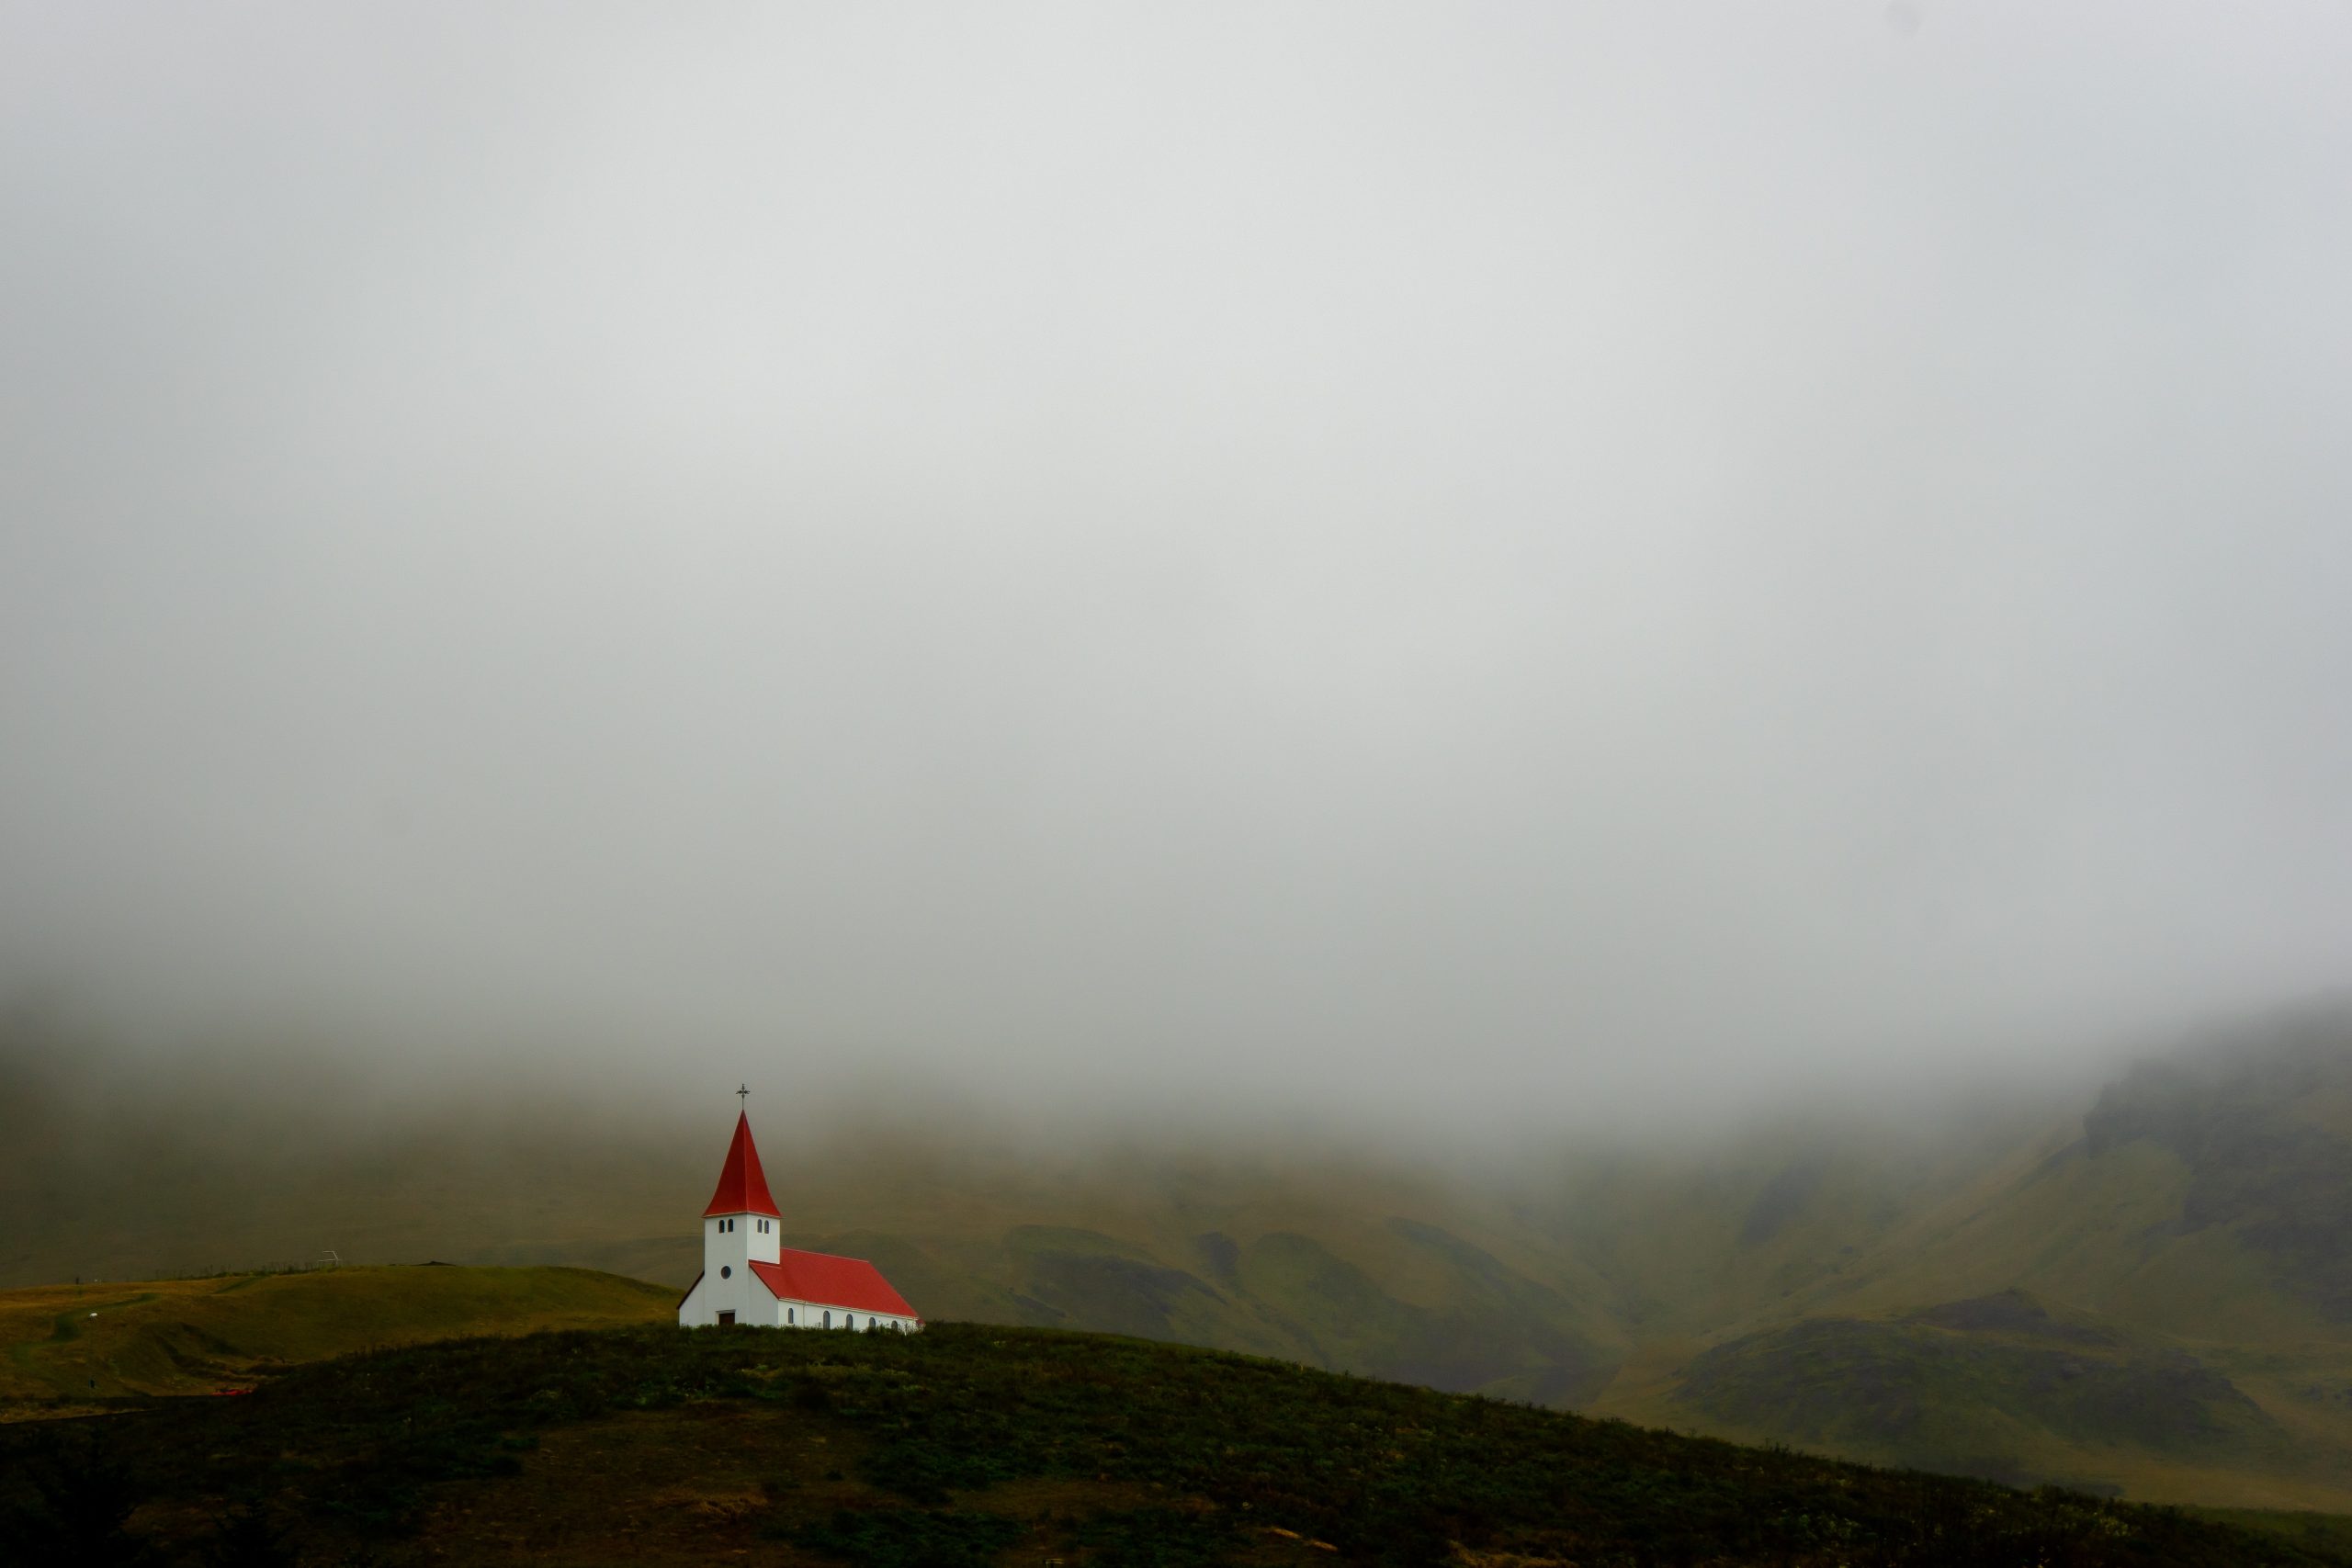 The church in Vik and low clouds in the background.